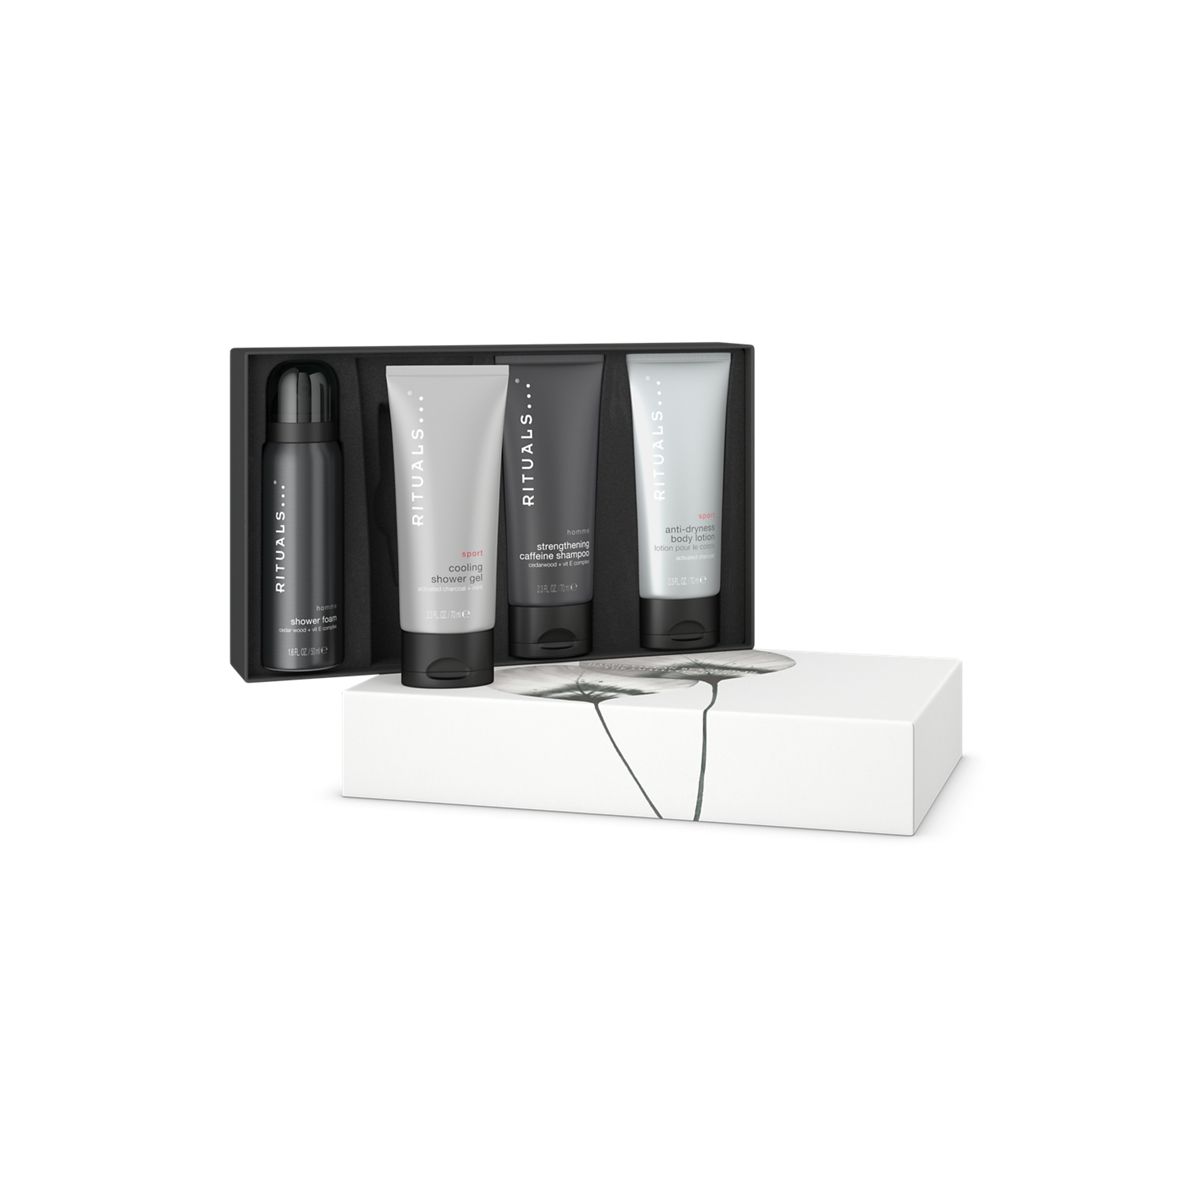 https://rituals.scene7.com/is/image/rituals/1116612-rituals-homme-giftset-s-pack-open-inlay:Square?resMode=sharp2&wid=1188&hei=1188